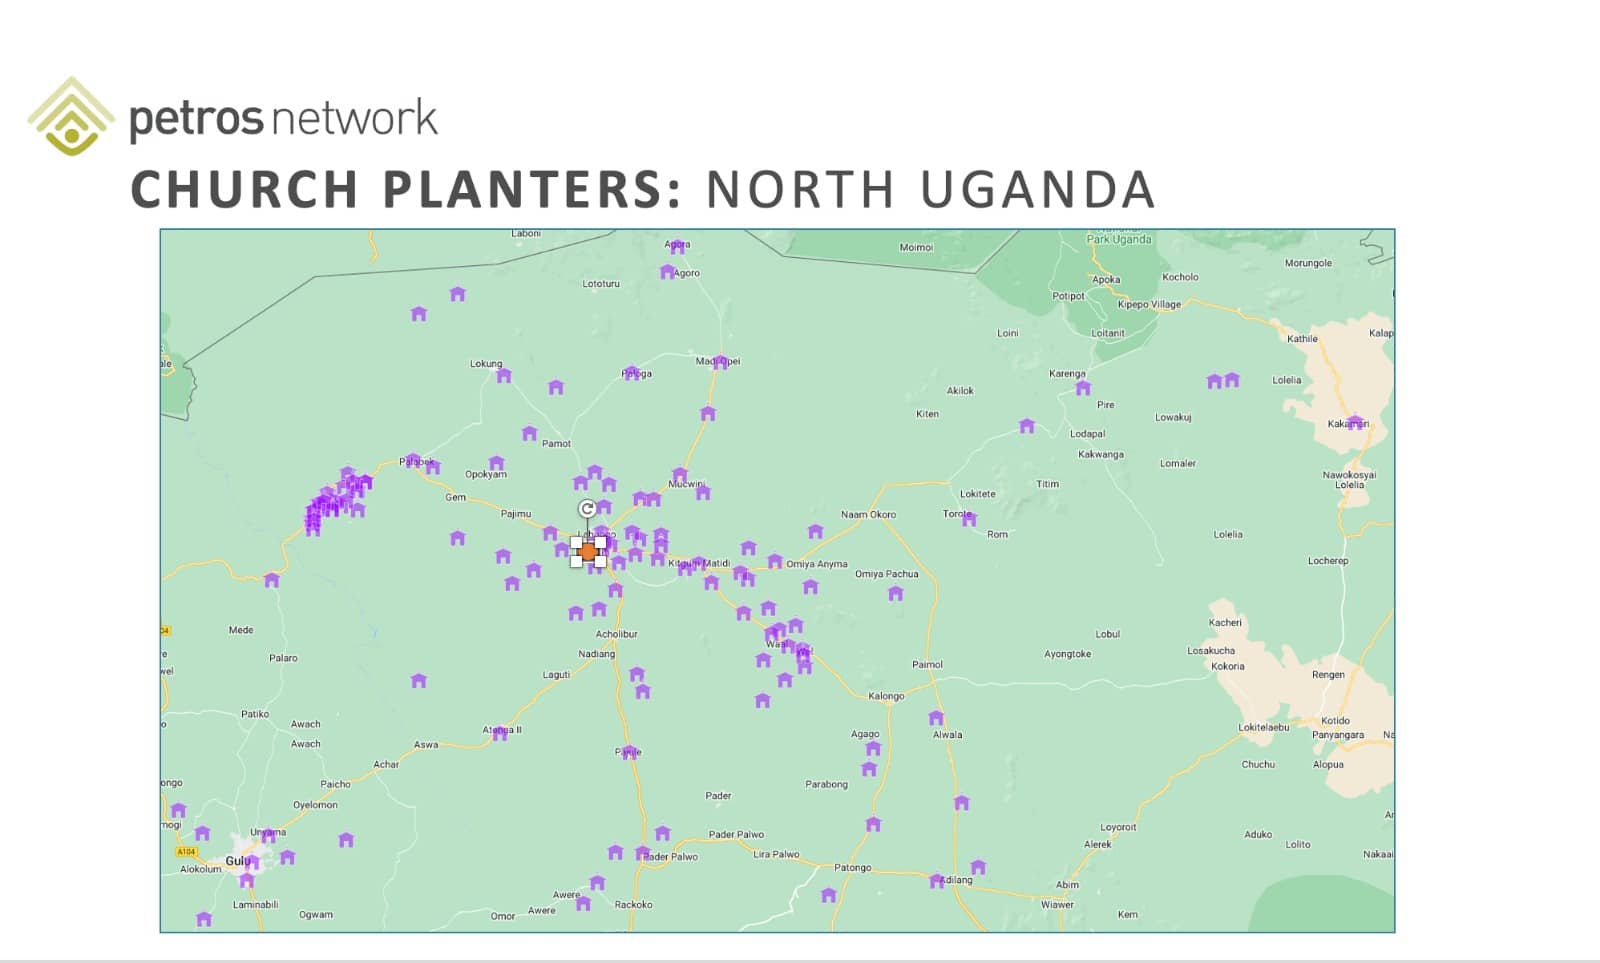 Petros Network Churches planted in Northern Uganda